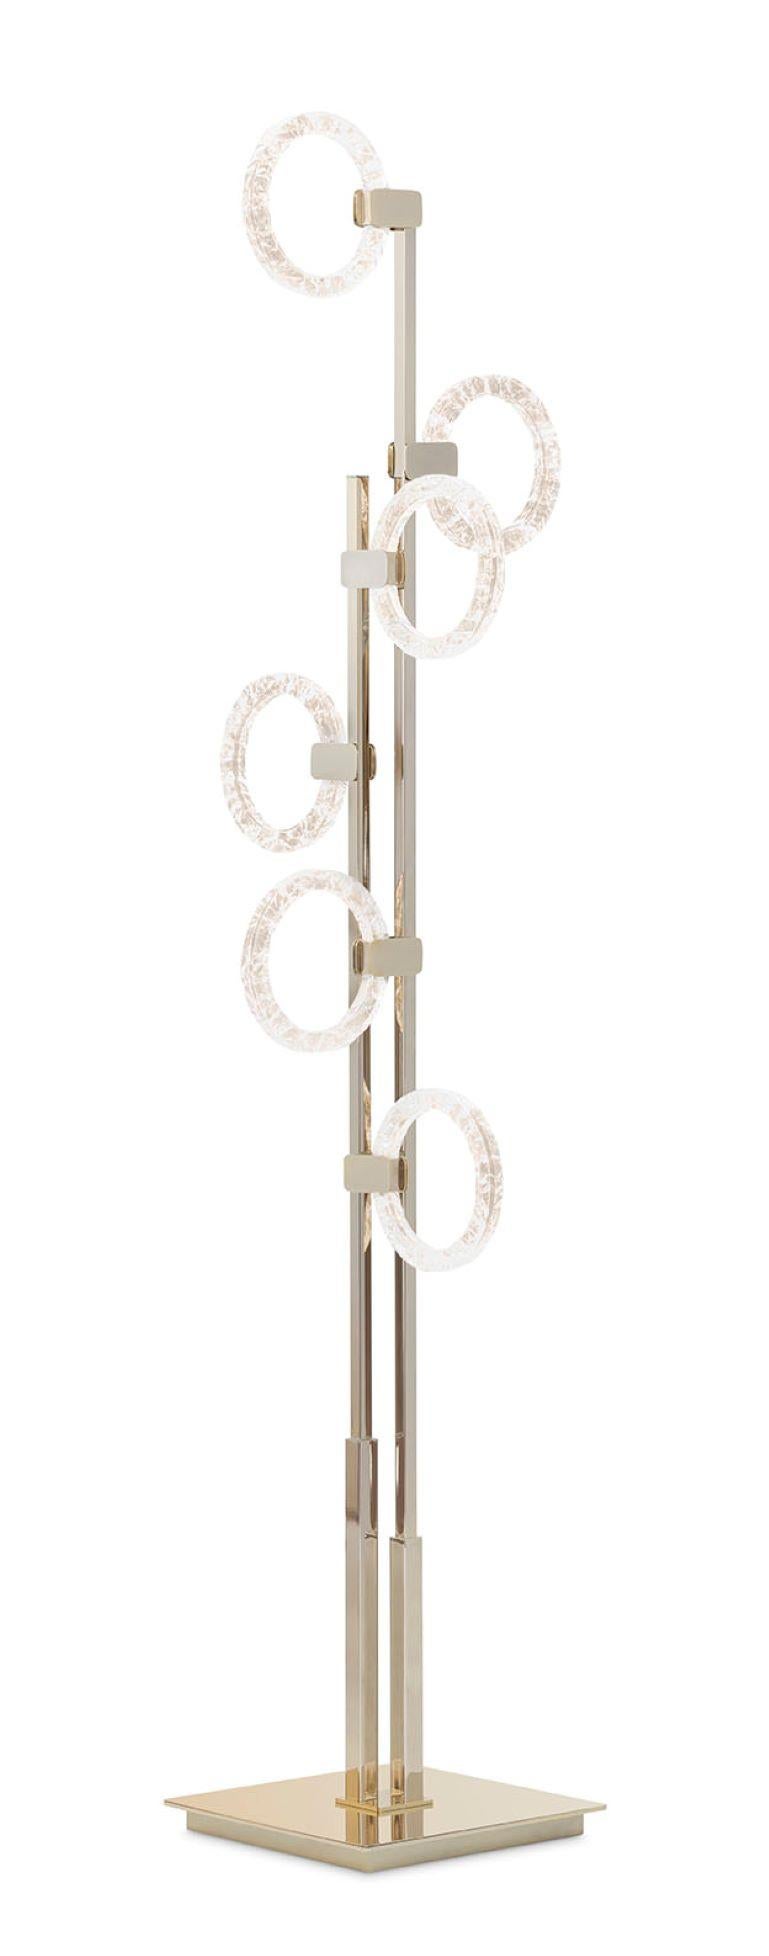 Modern Floor Lamp Metal Structur Polished Champagne Finish Decorative Methacrylate Ring For Sale